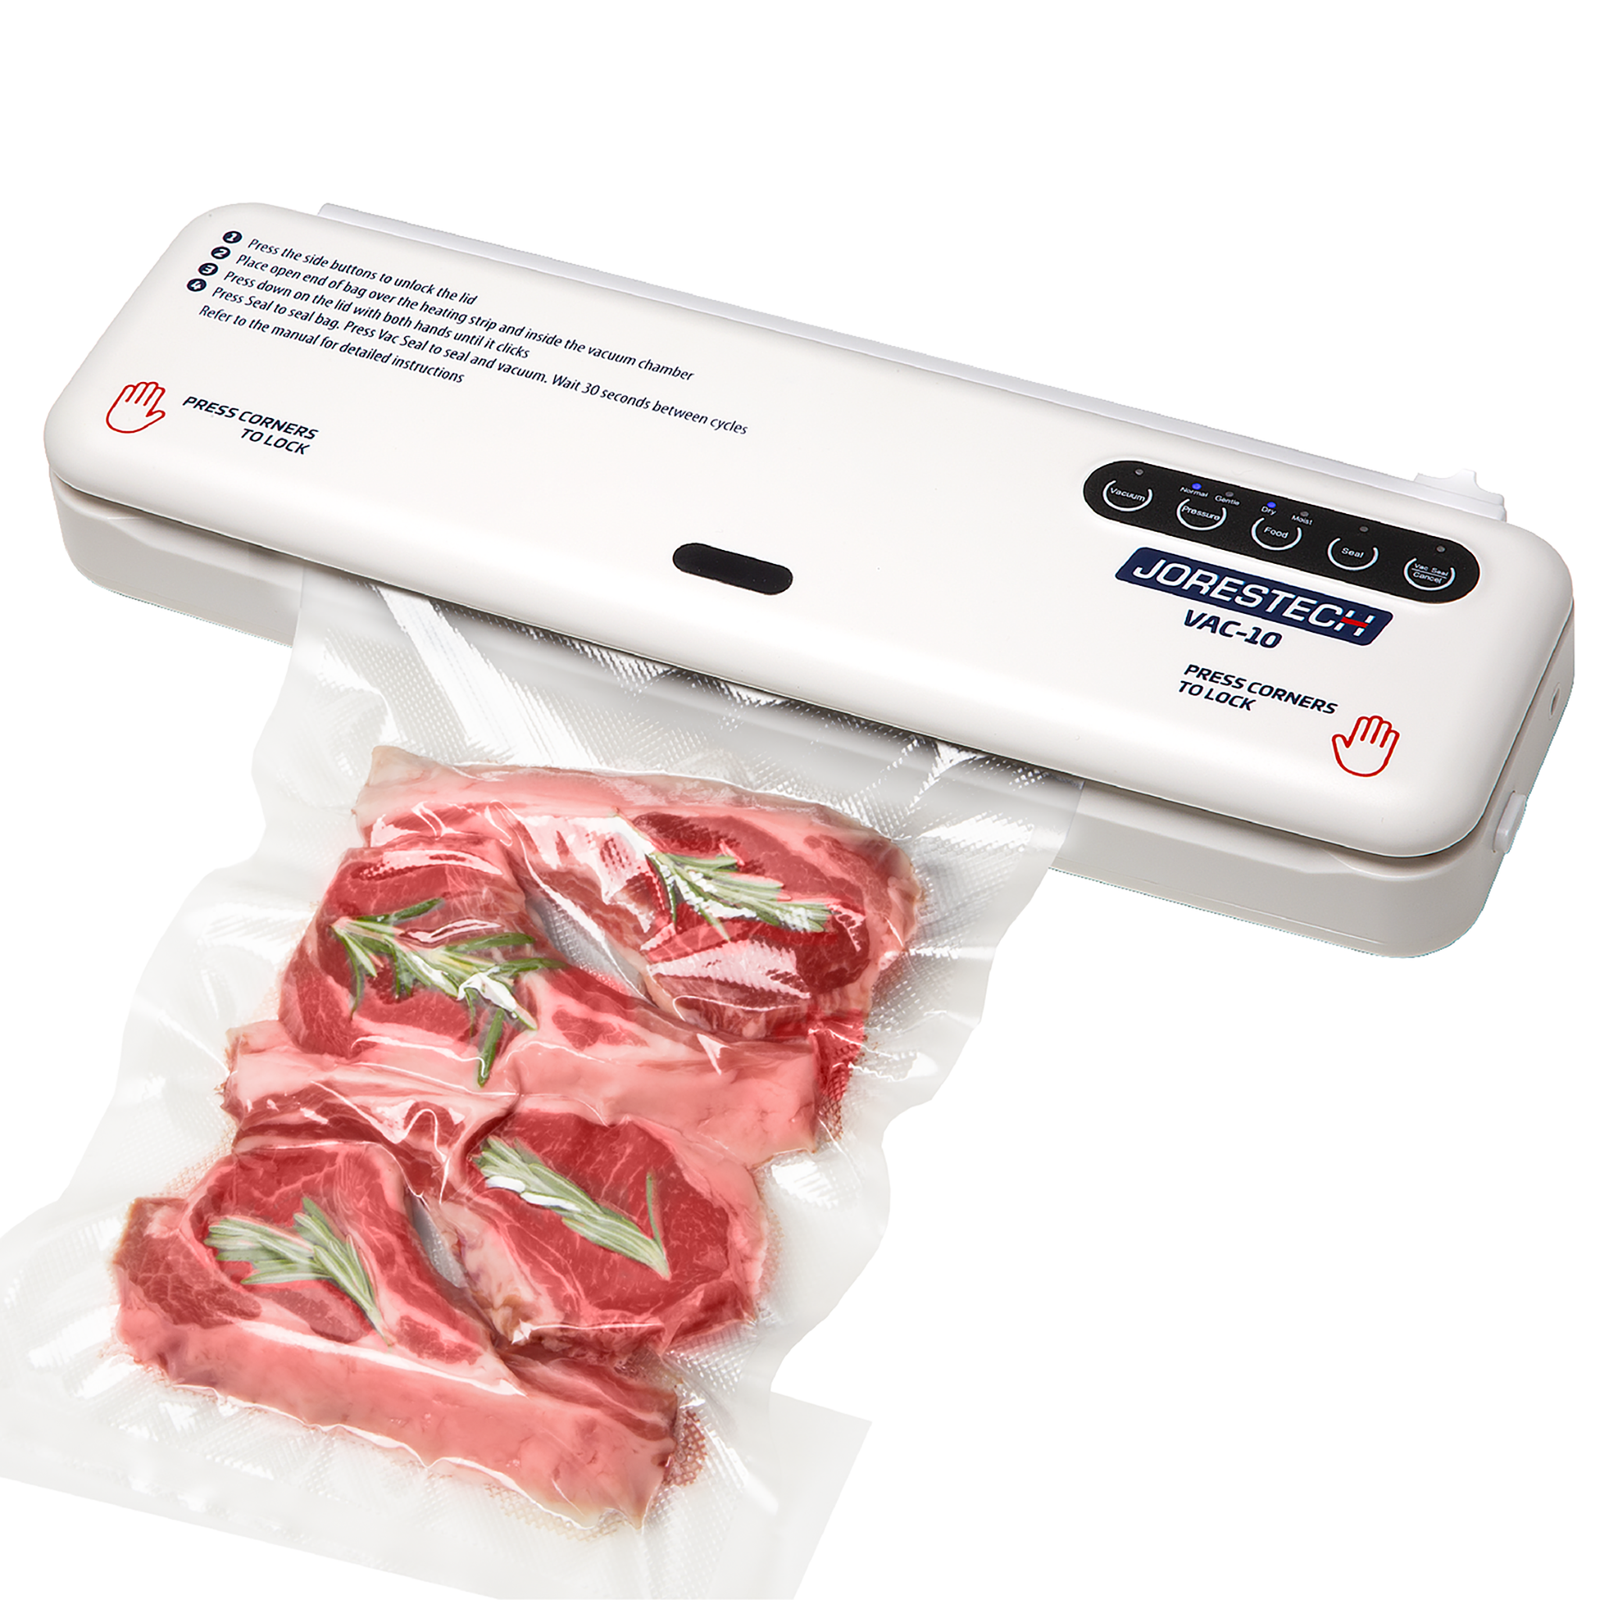 How to Seal Foods Airtight Without a Vacuum Sealer